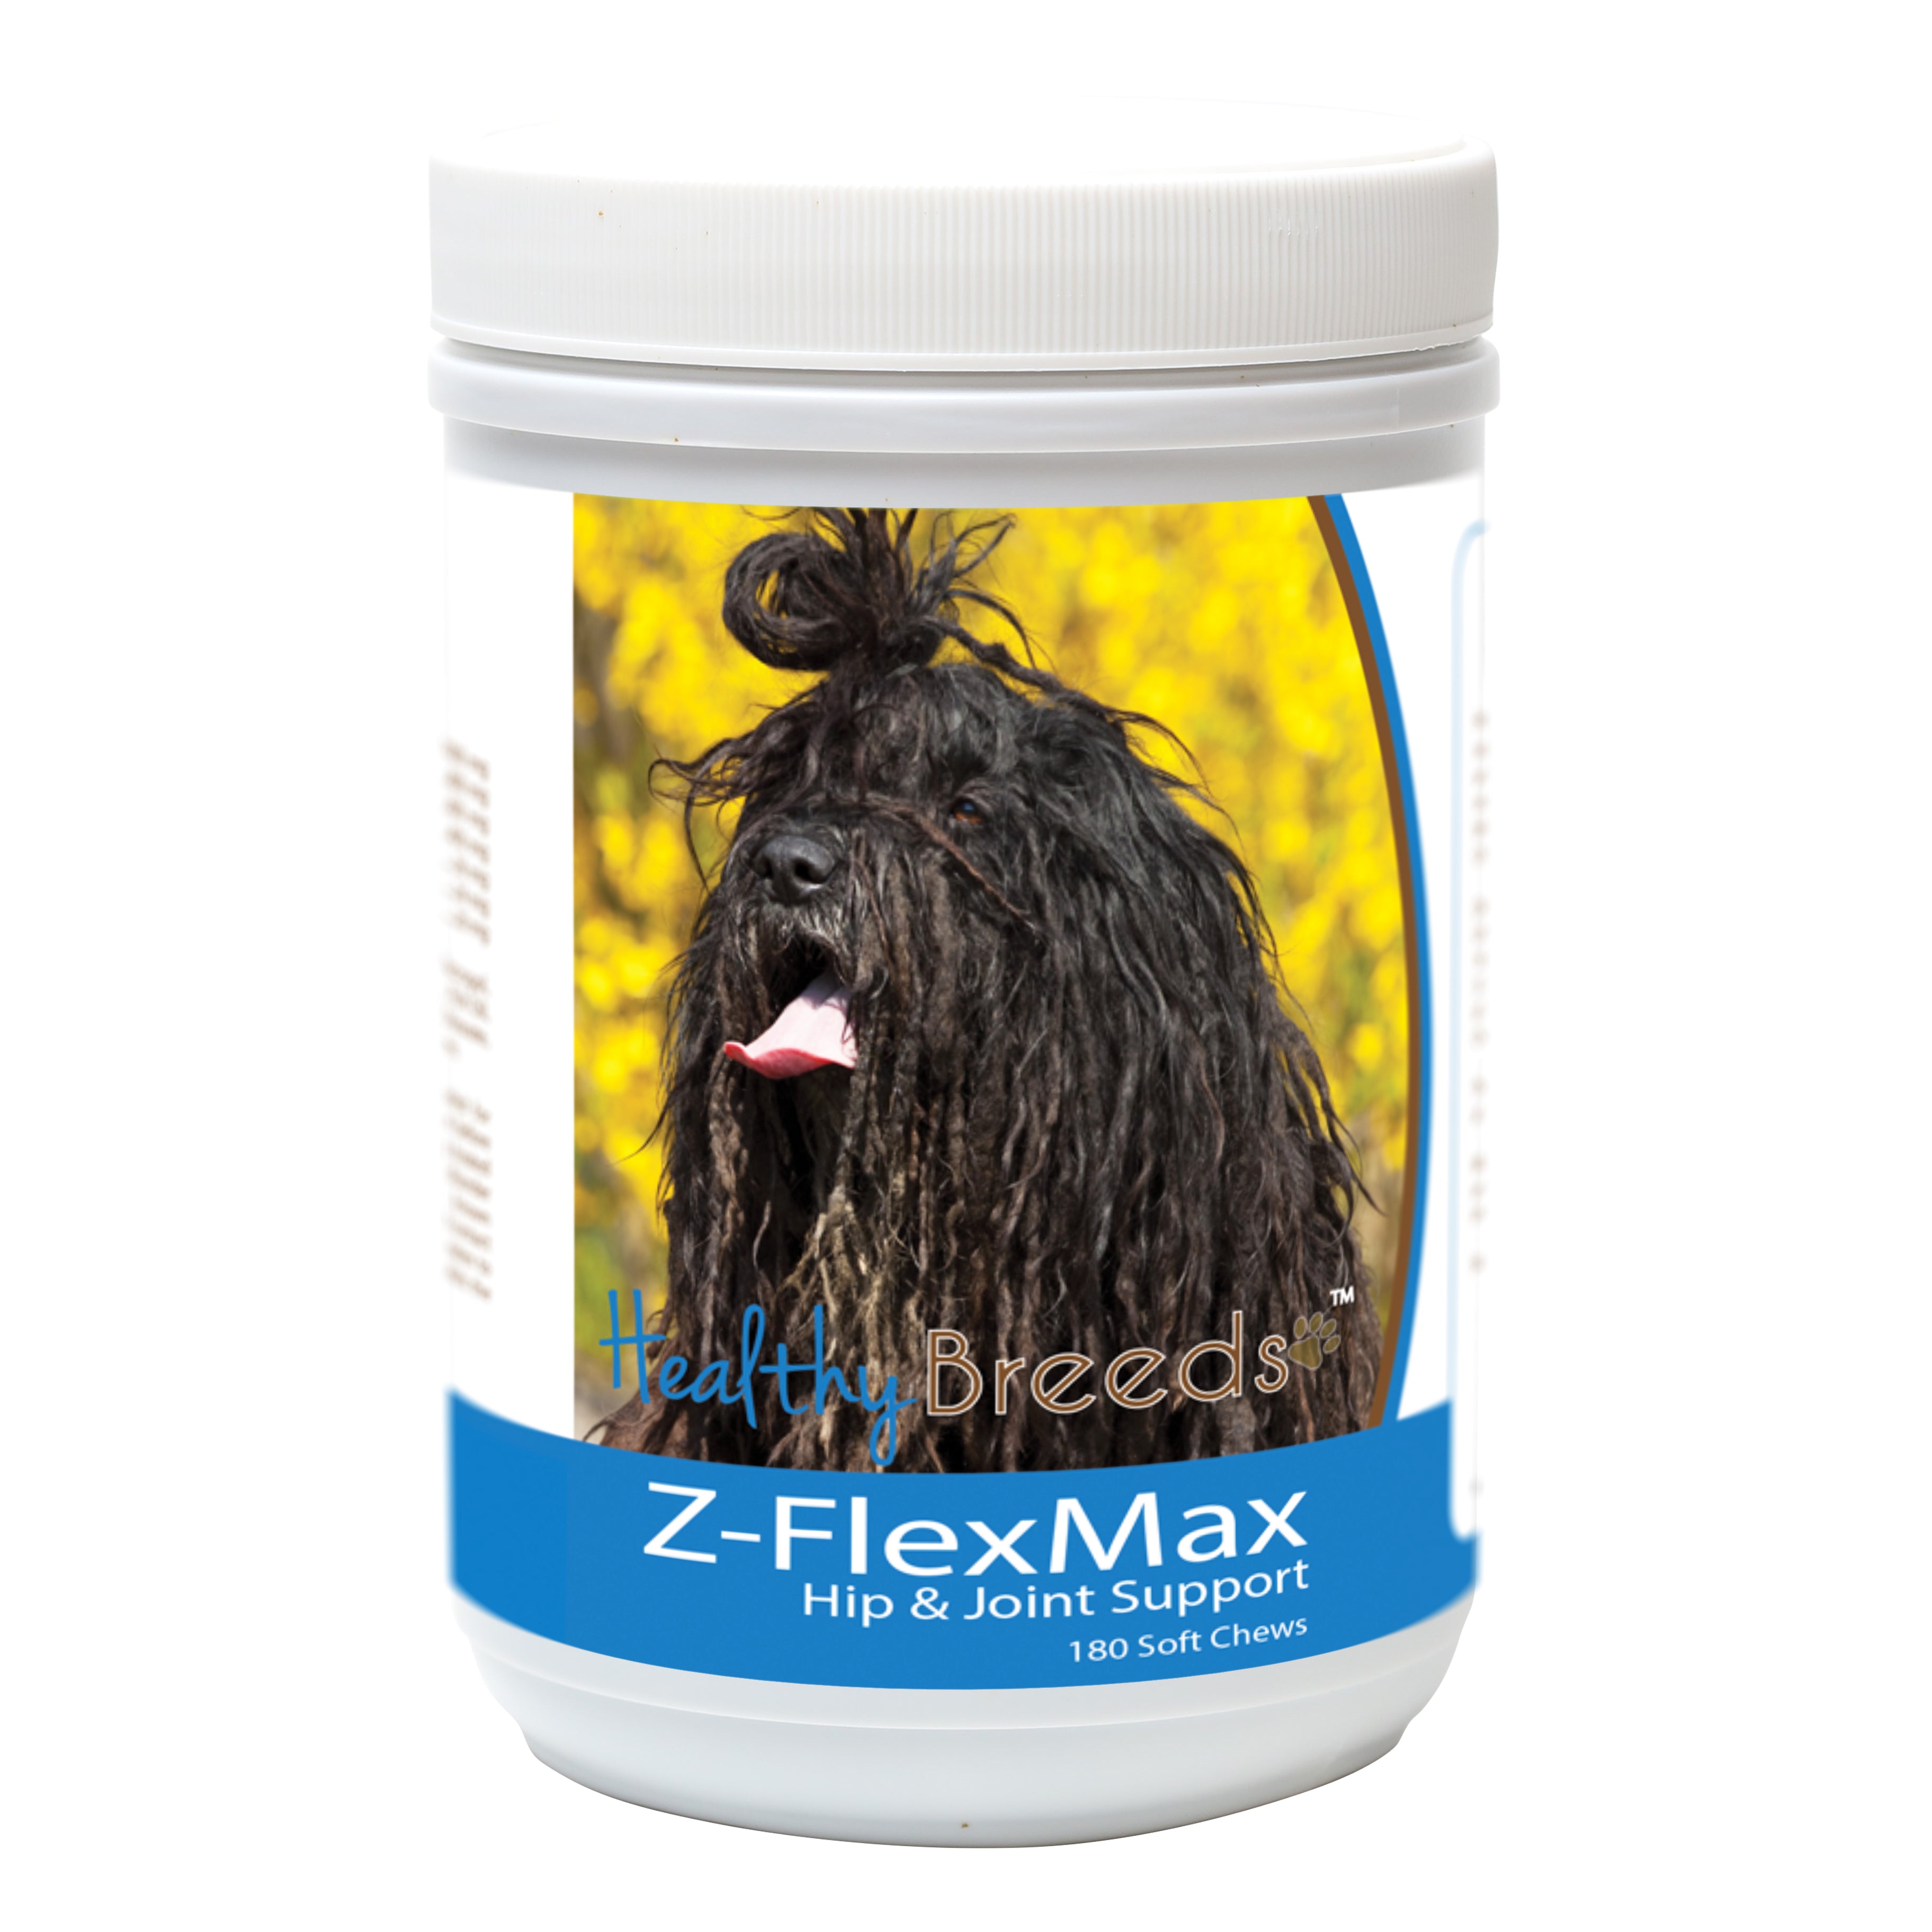 Bergamasco Z-Flex Max Dog Hip and Joint Support 180 Count